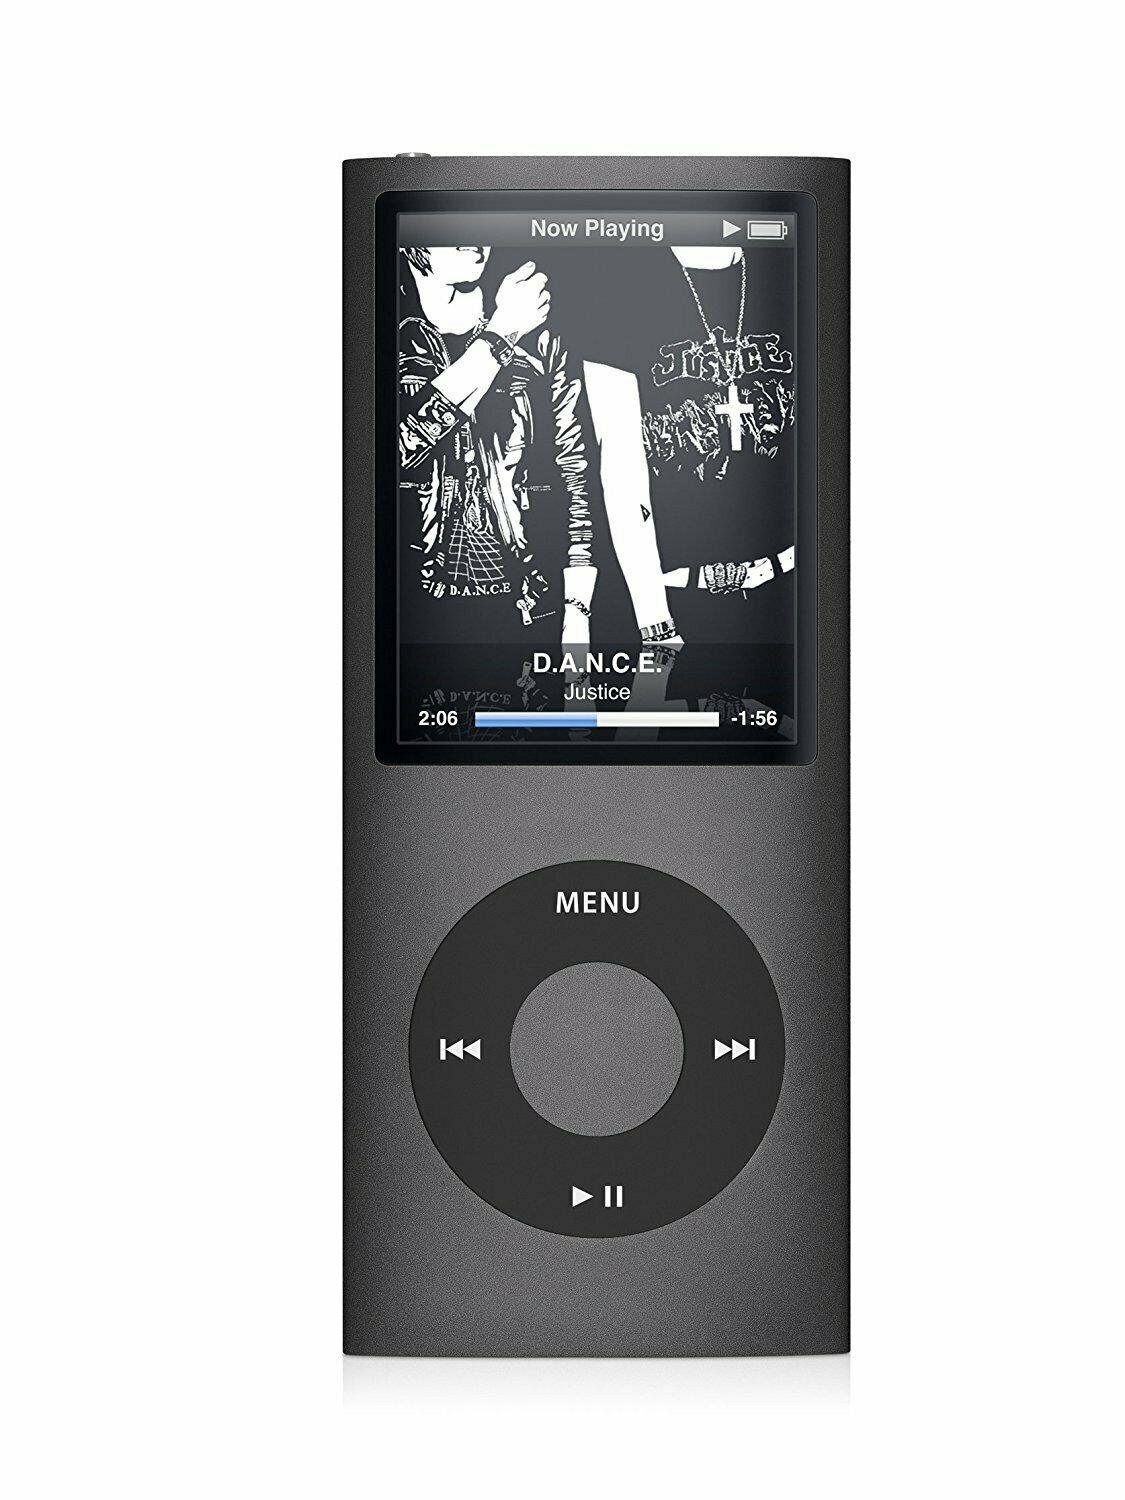 download the new version for ipod EdgeView 4